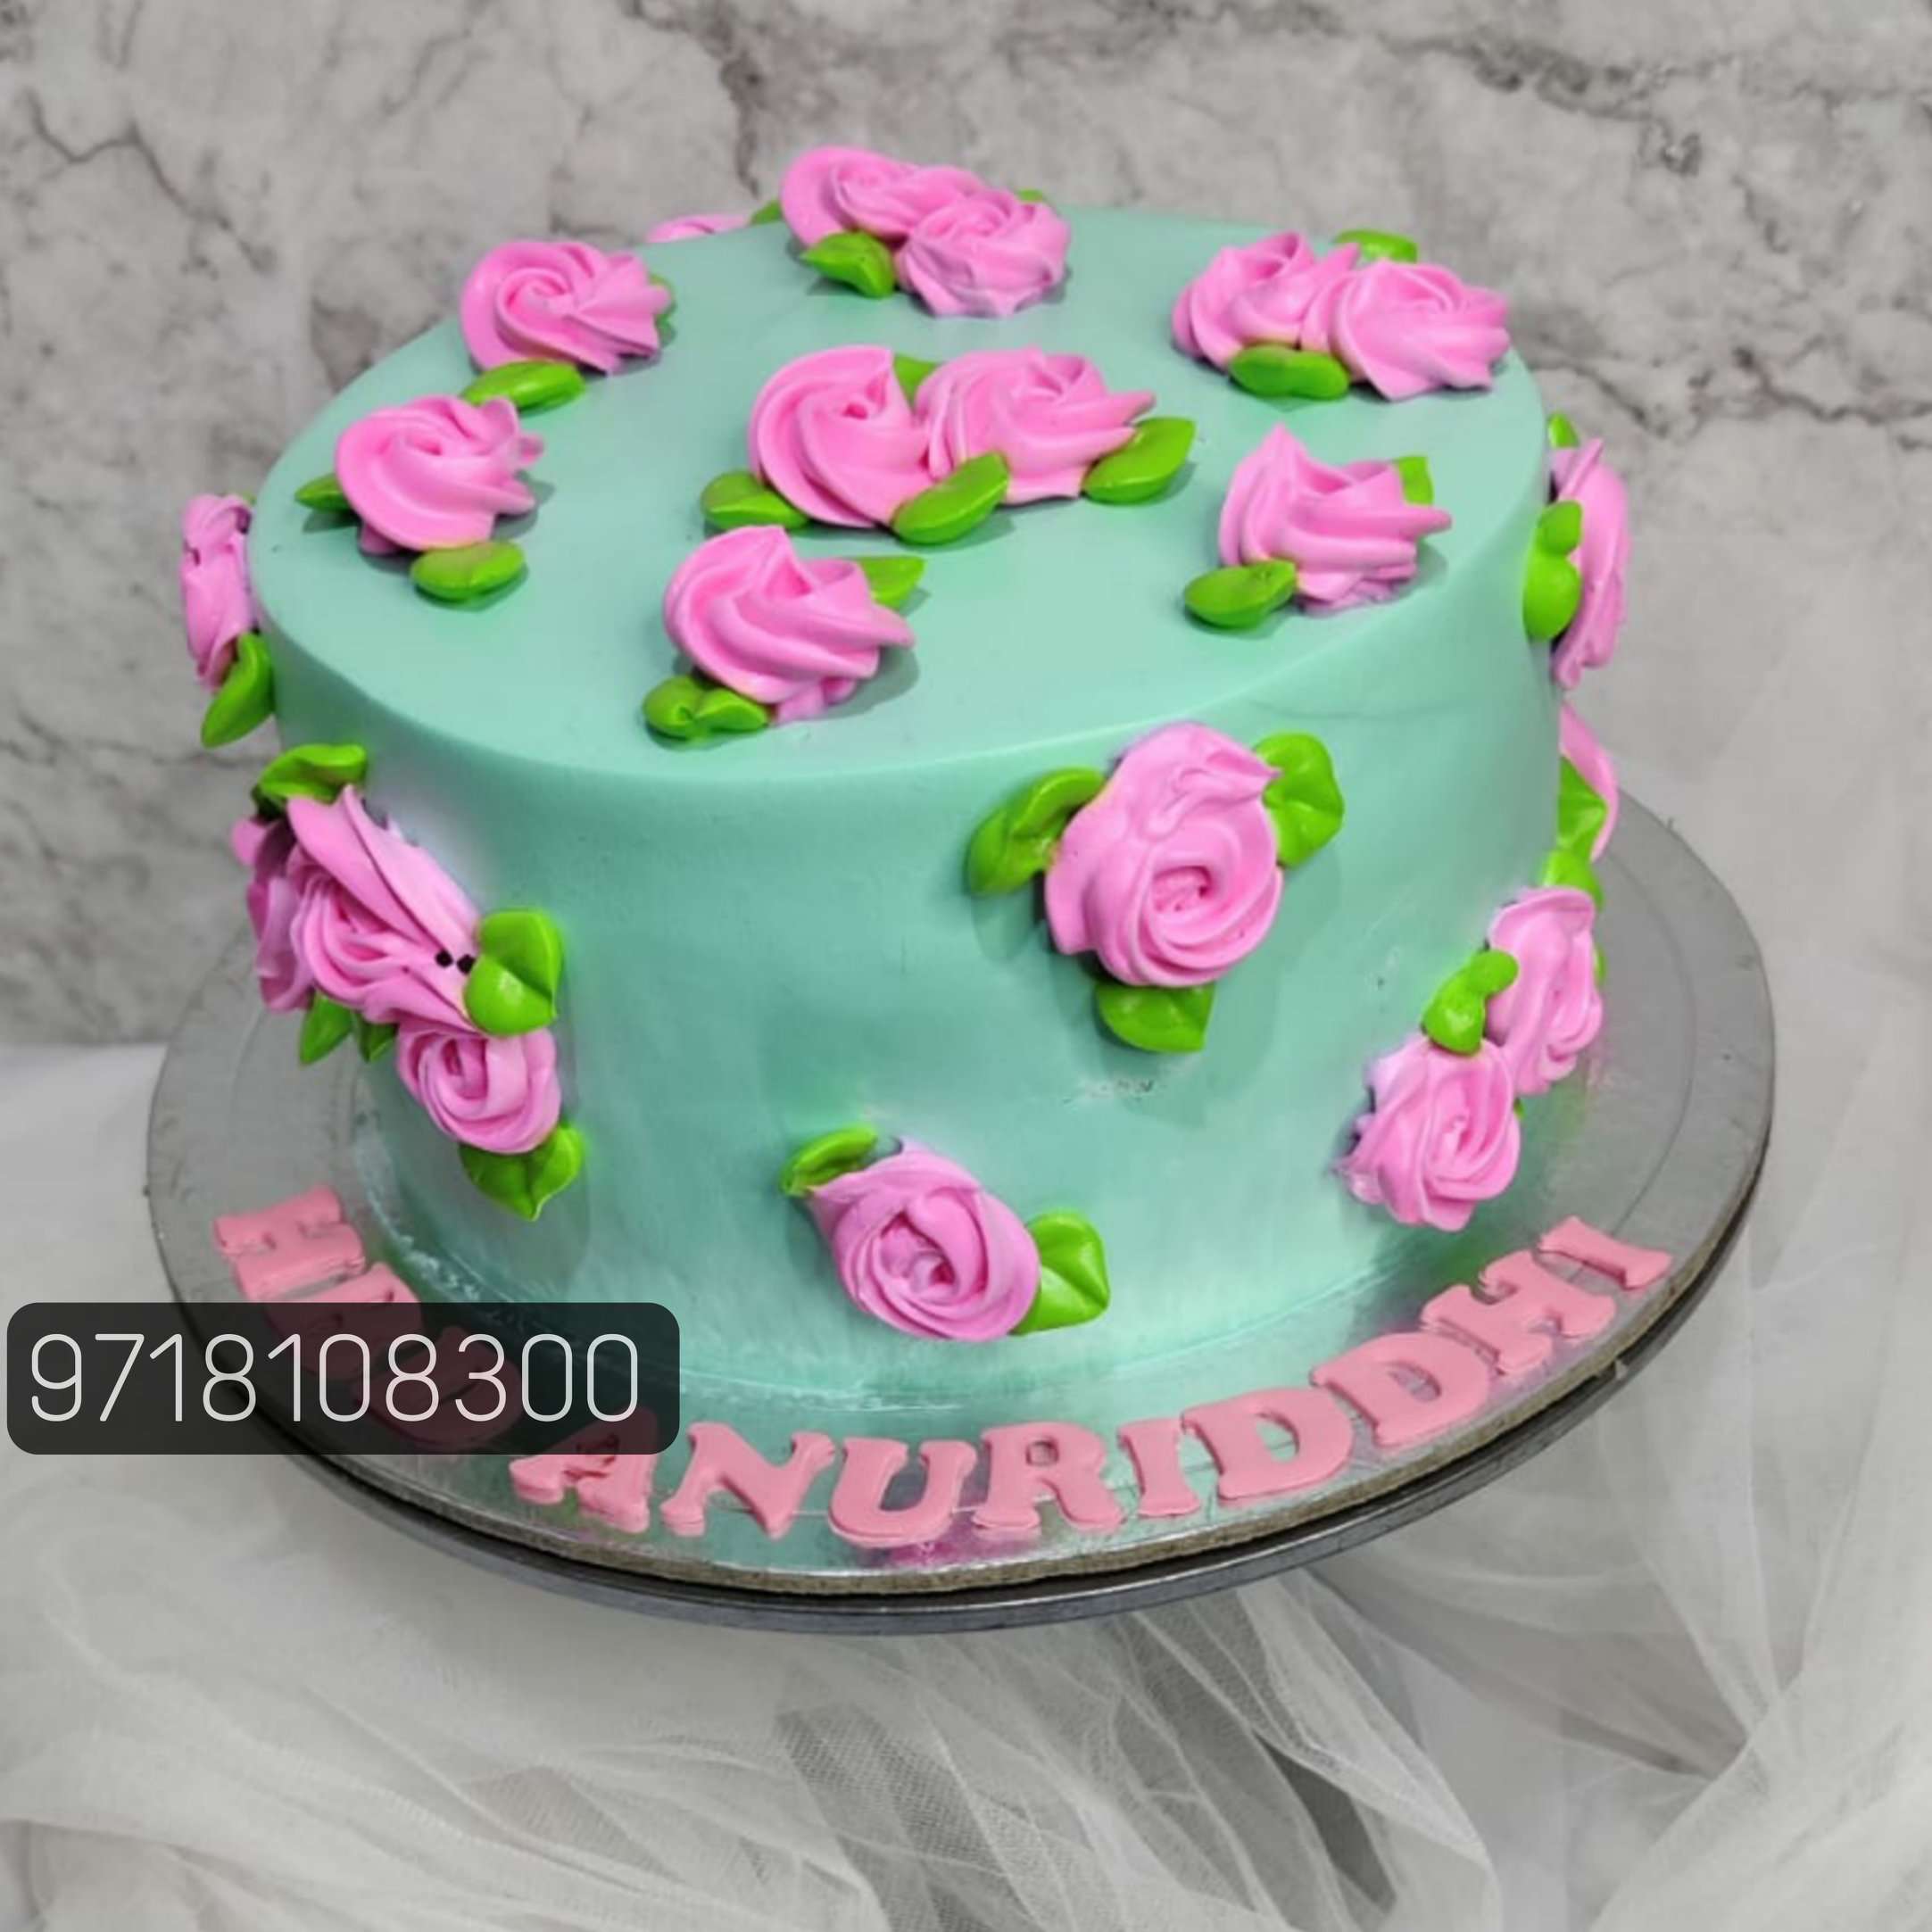 33 Edible Flower Cakes That're Simple But Outstanding : Birthday Cake